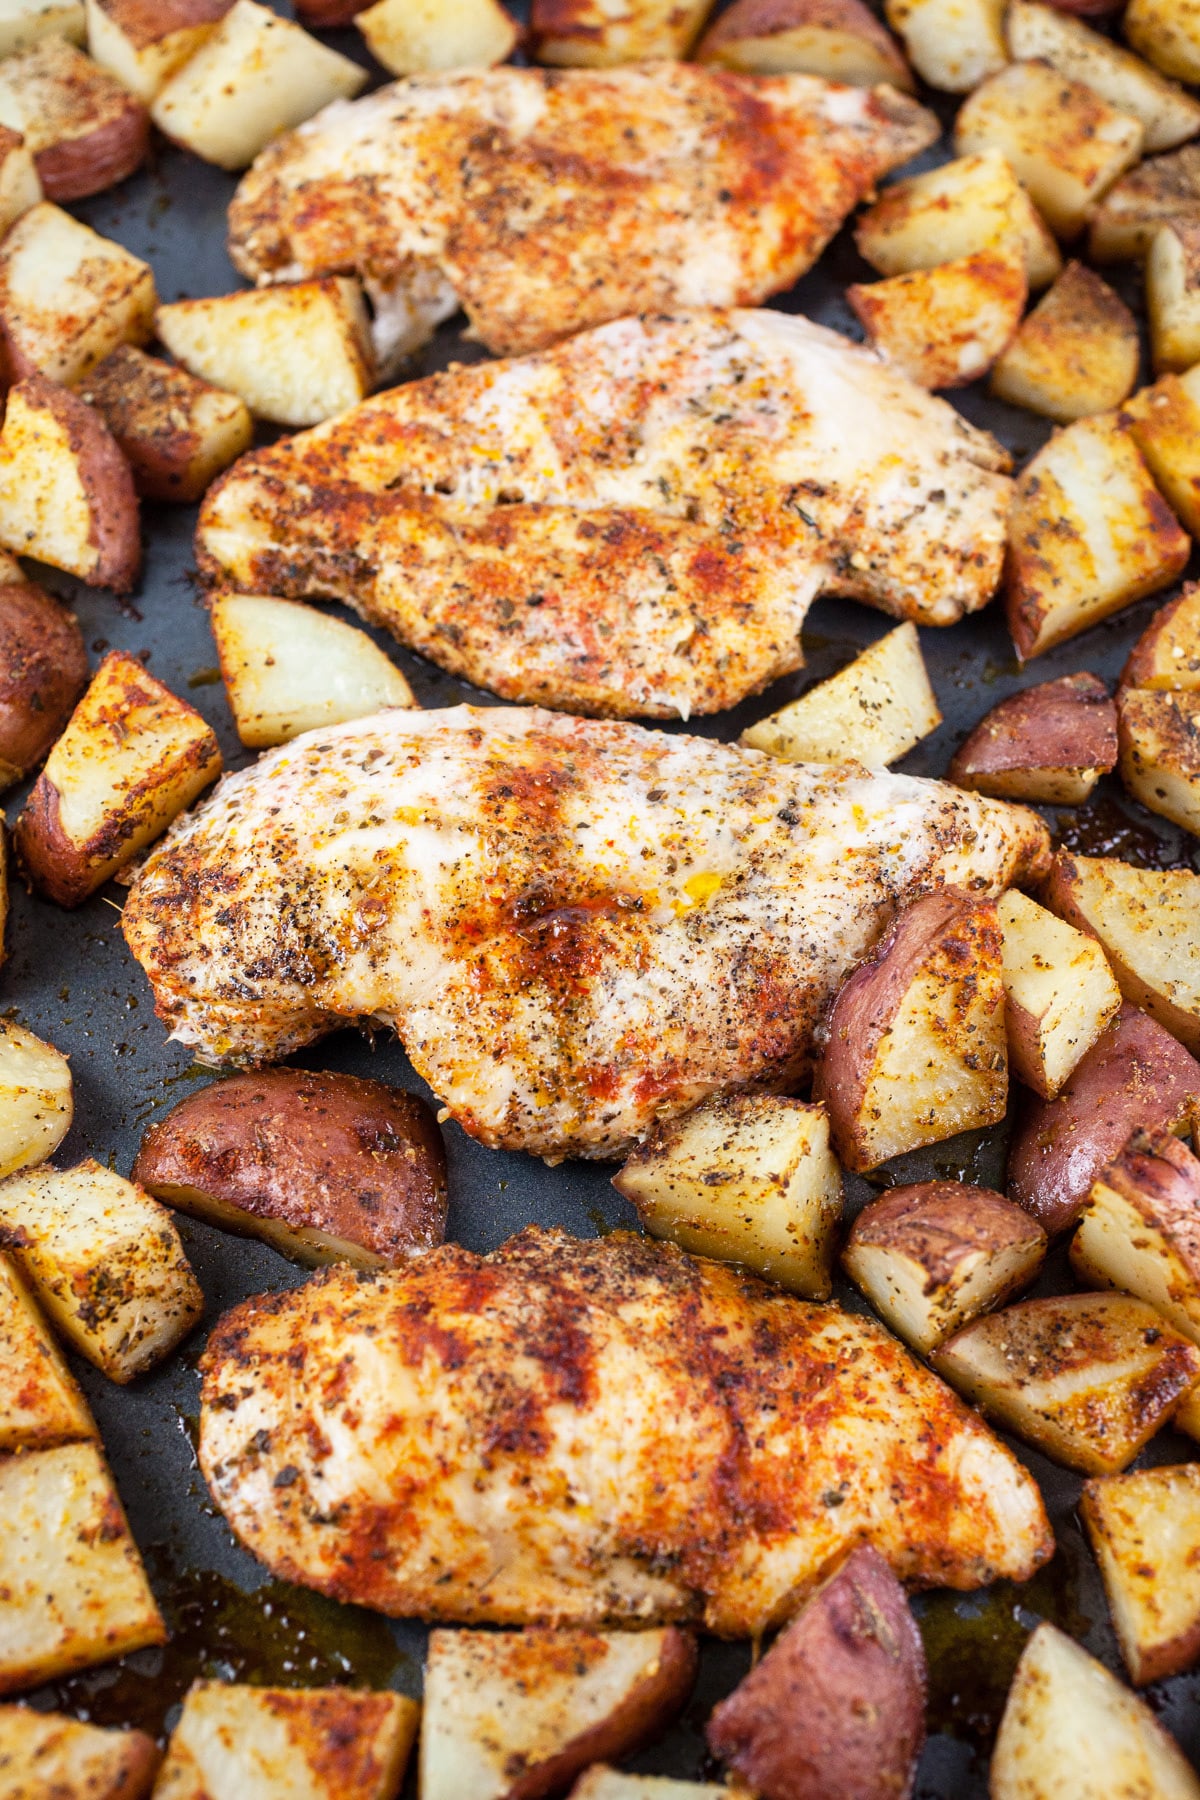 Cooked chicken breasts and potatoes on baking sheet.